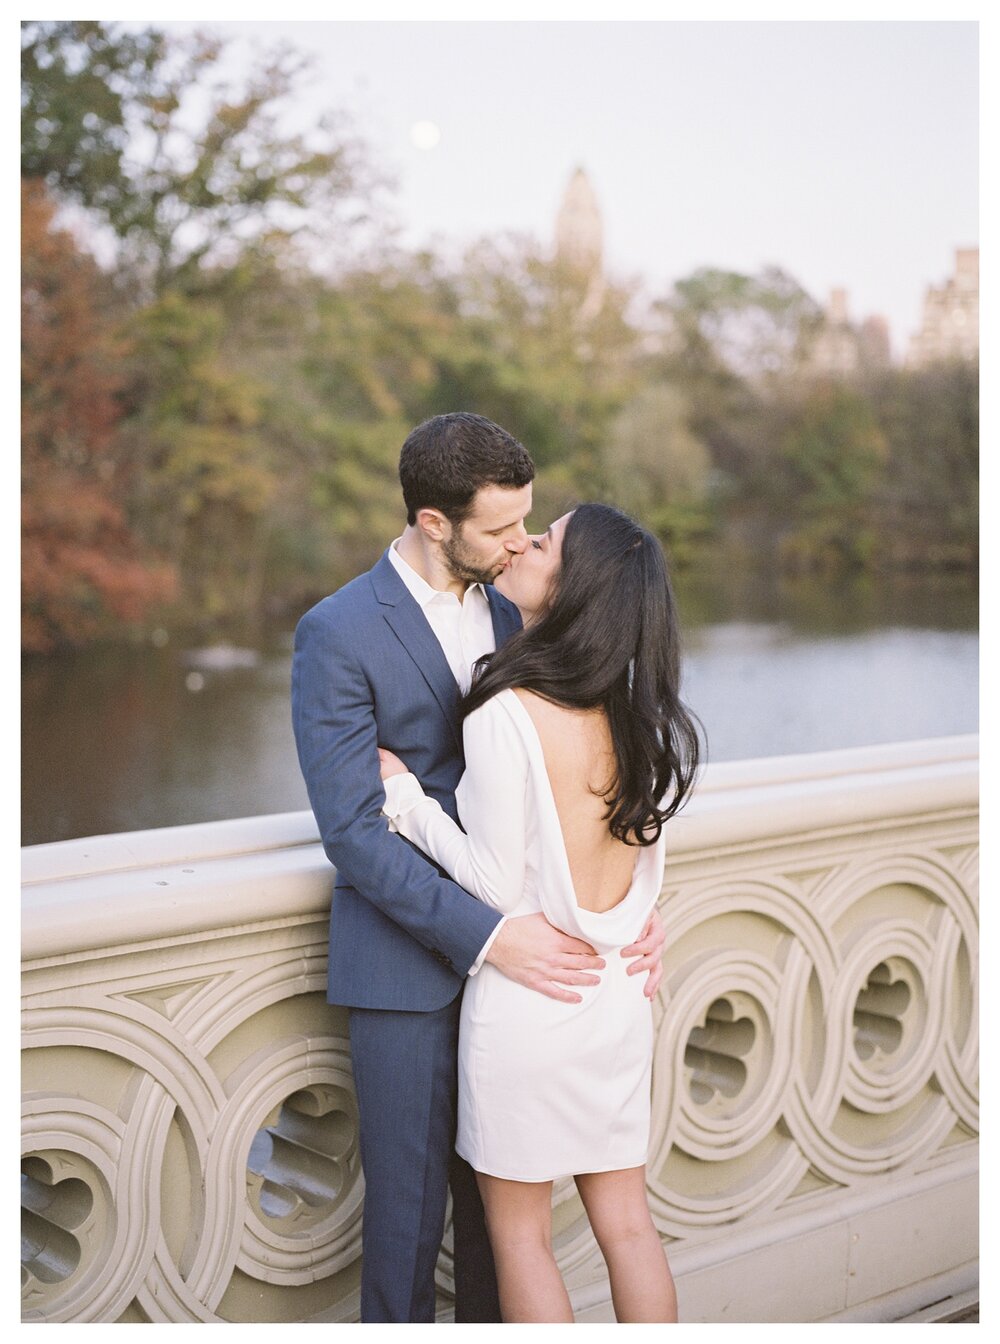  couple portraits in central park kissing on bow bridge, new york city in autumn  